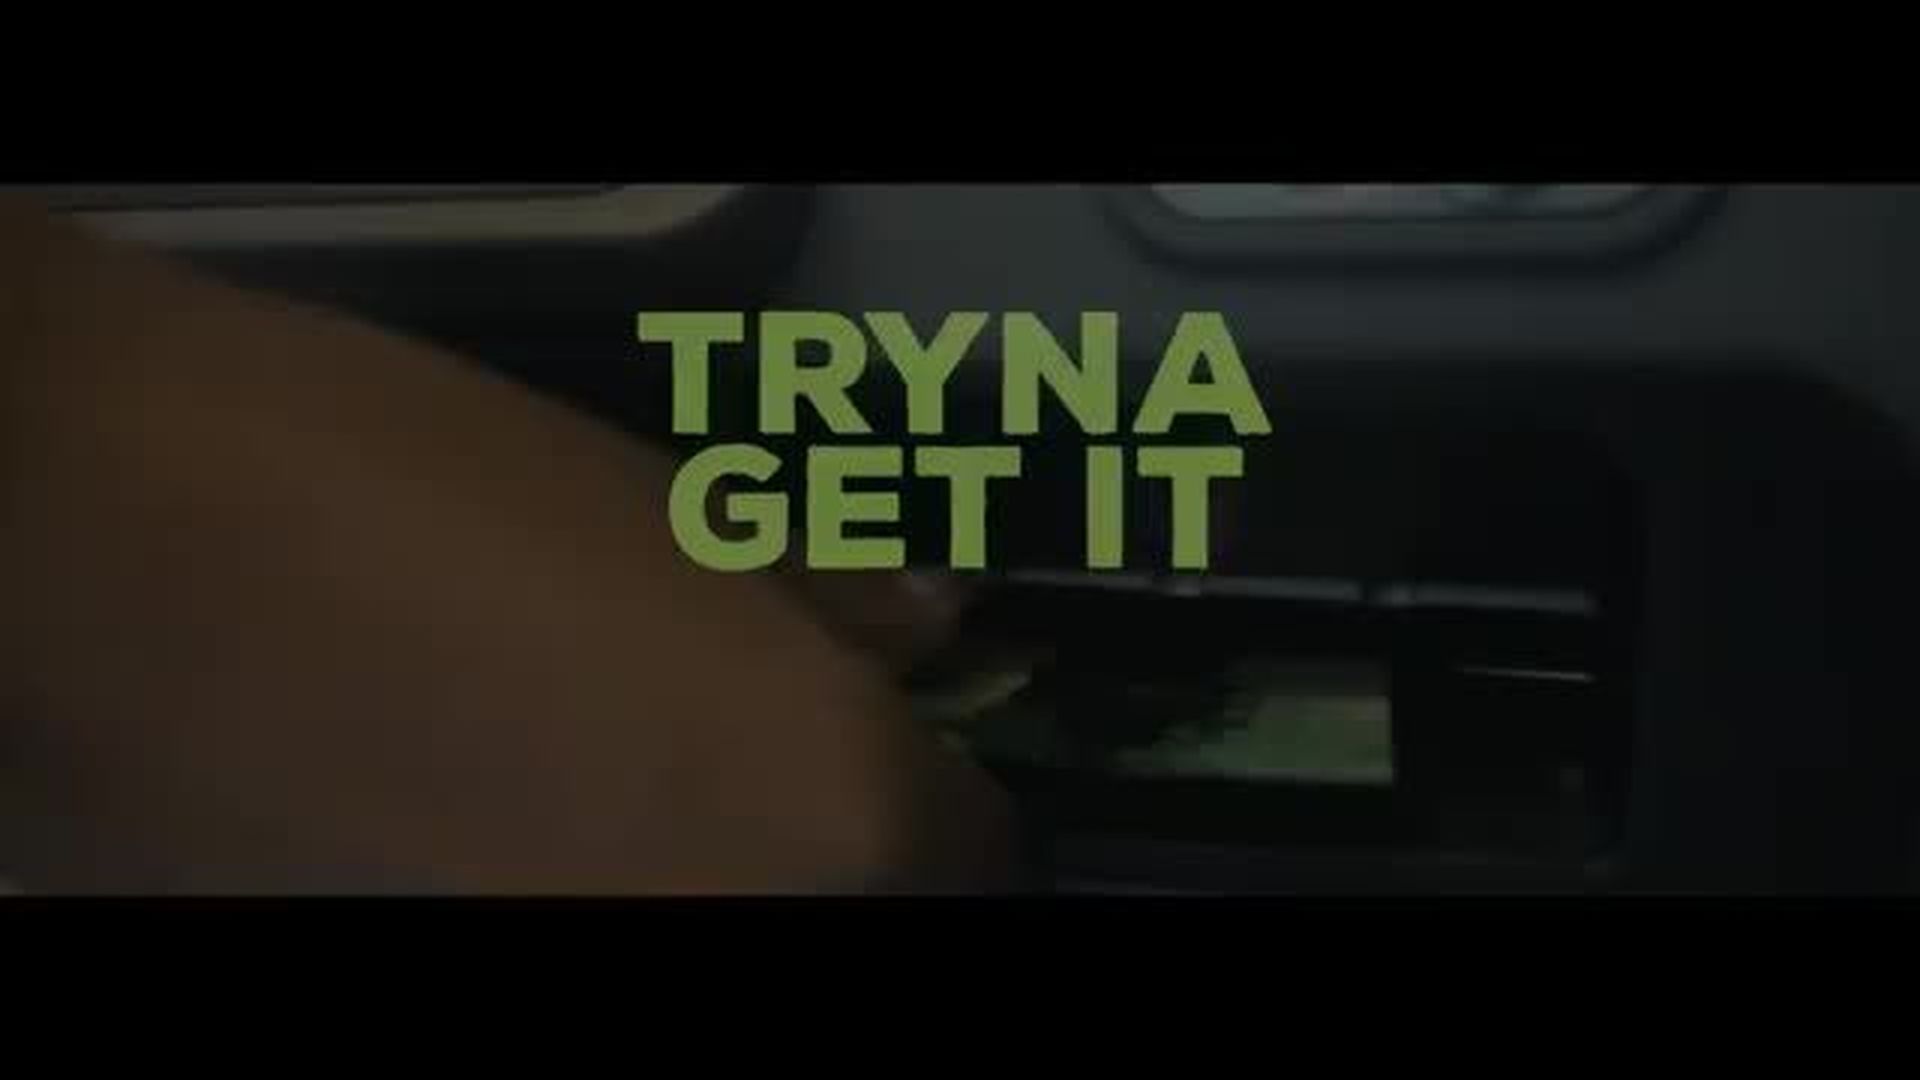 Kandy K - Tryna Get It (OFFICIAL MUSIC VIDEO)